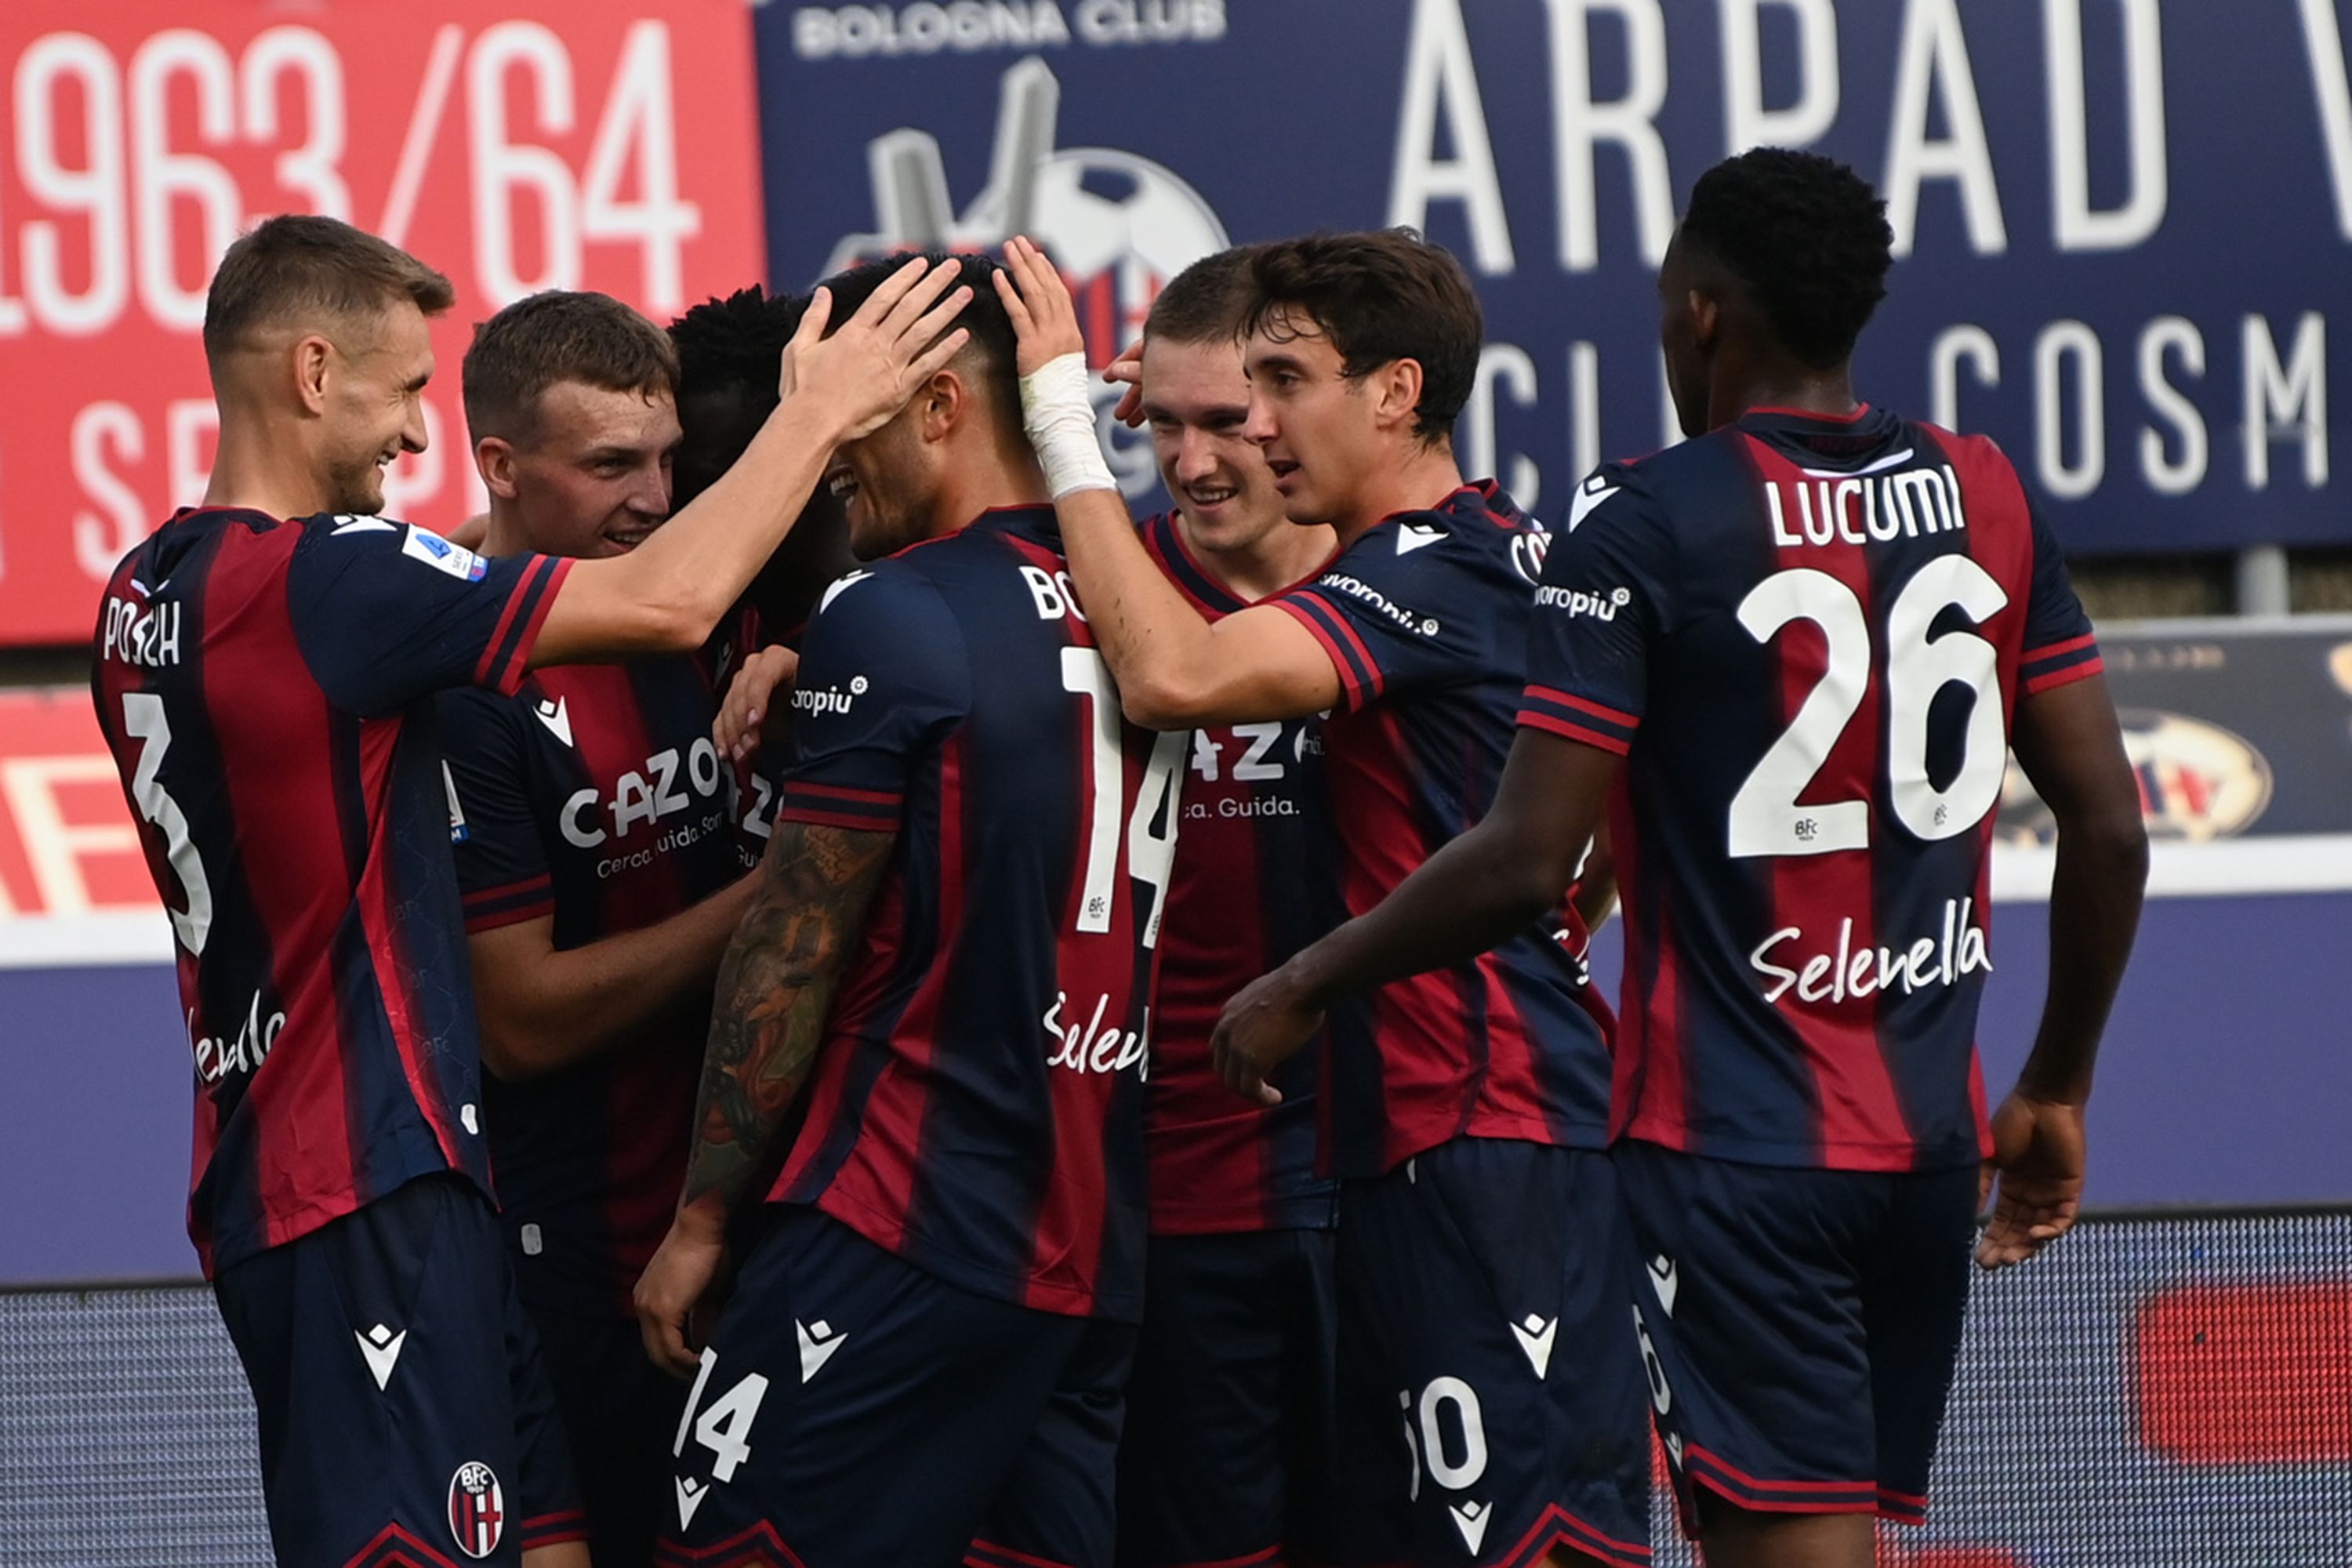 Monza vs Bologna: Prediction, Odds, Betting Tips, and How to Watch | 31/10/2022